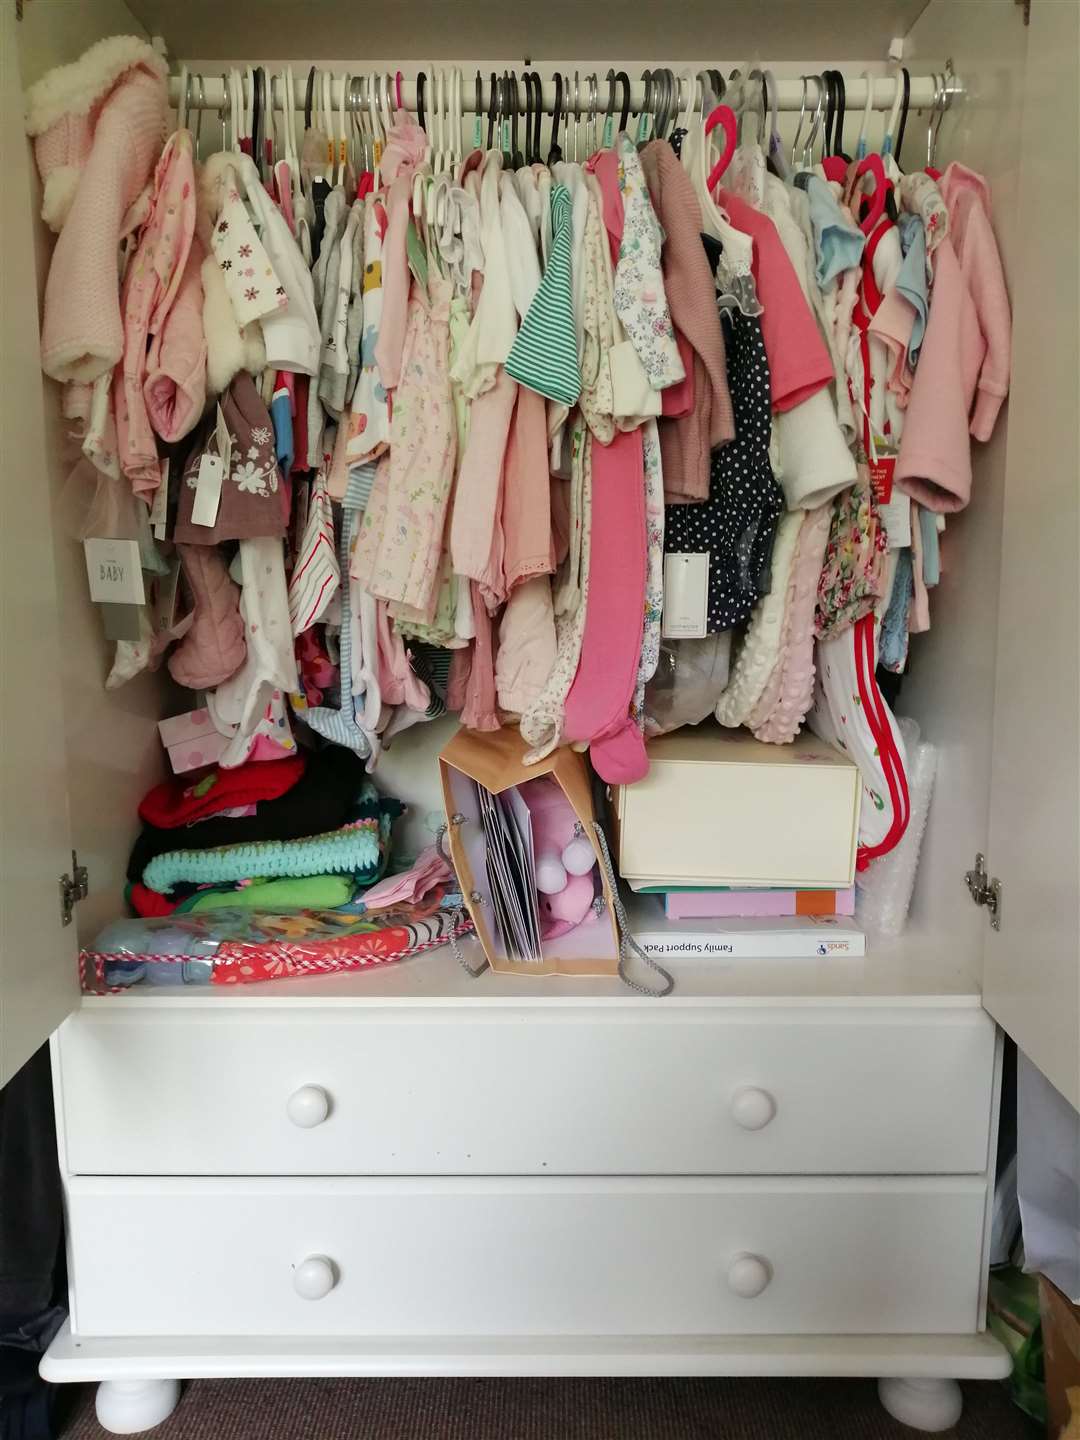 The excited parents spent thousands kitting out their baby girl's room. Picture: SWNS